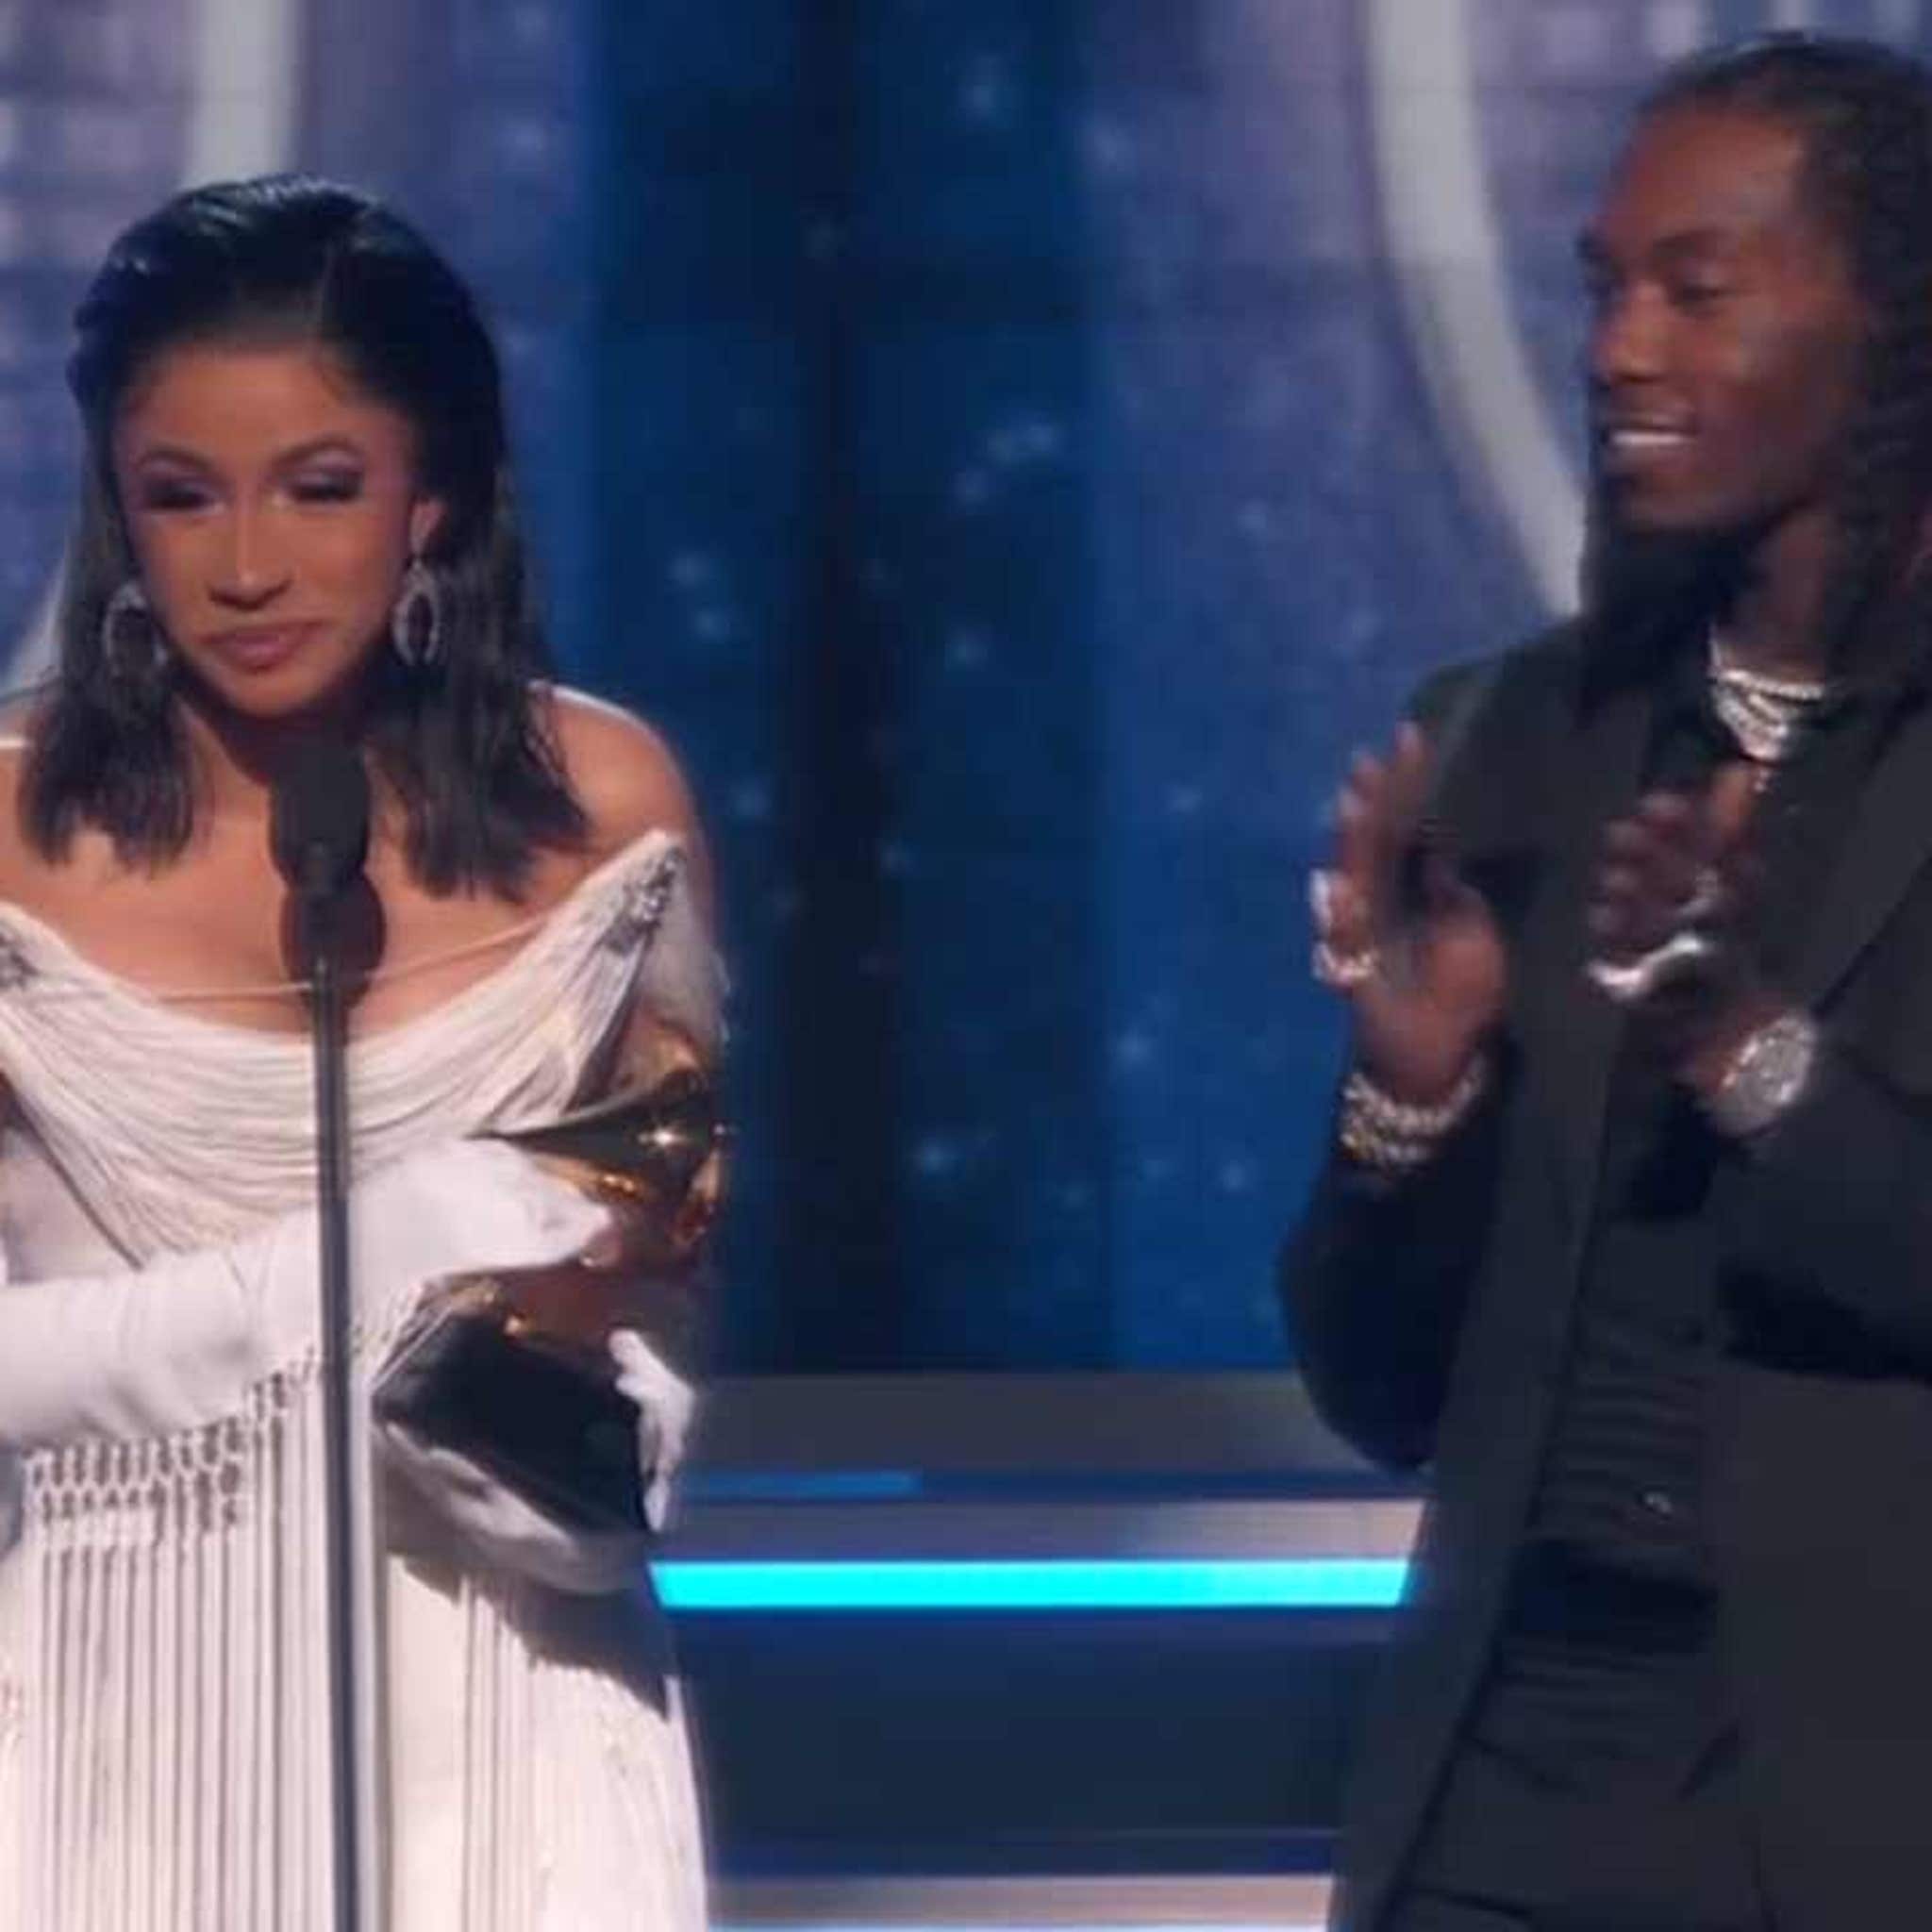 Cardi B and Offset All Over Each Other at the 2019 Grammys - PAPER Magazine